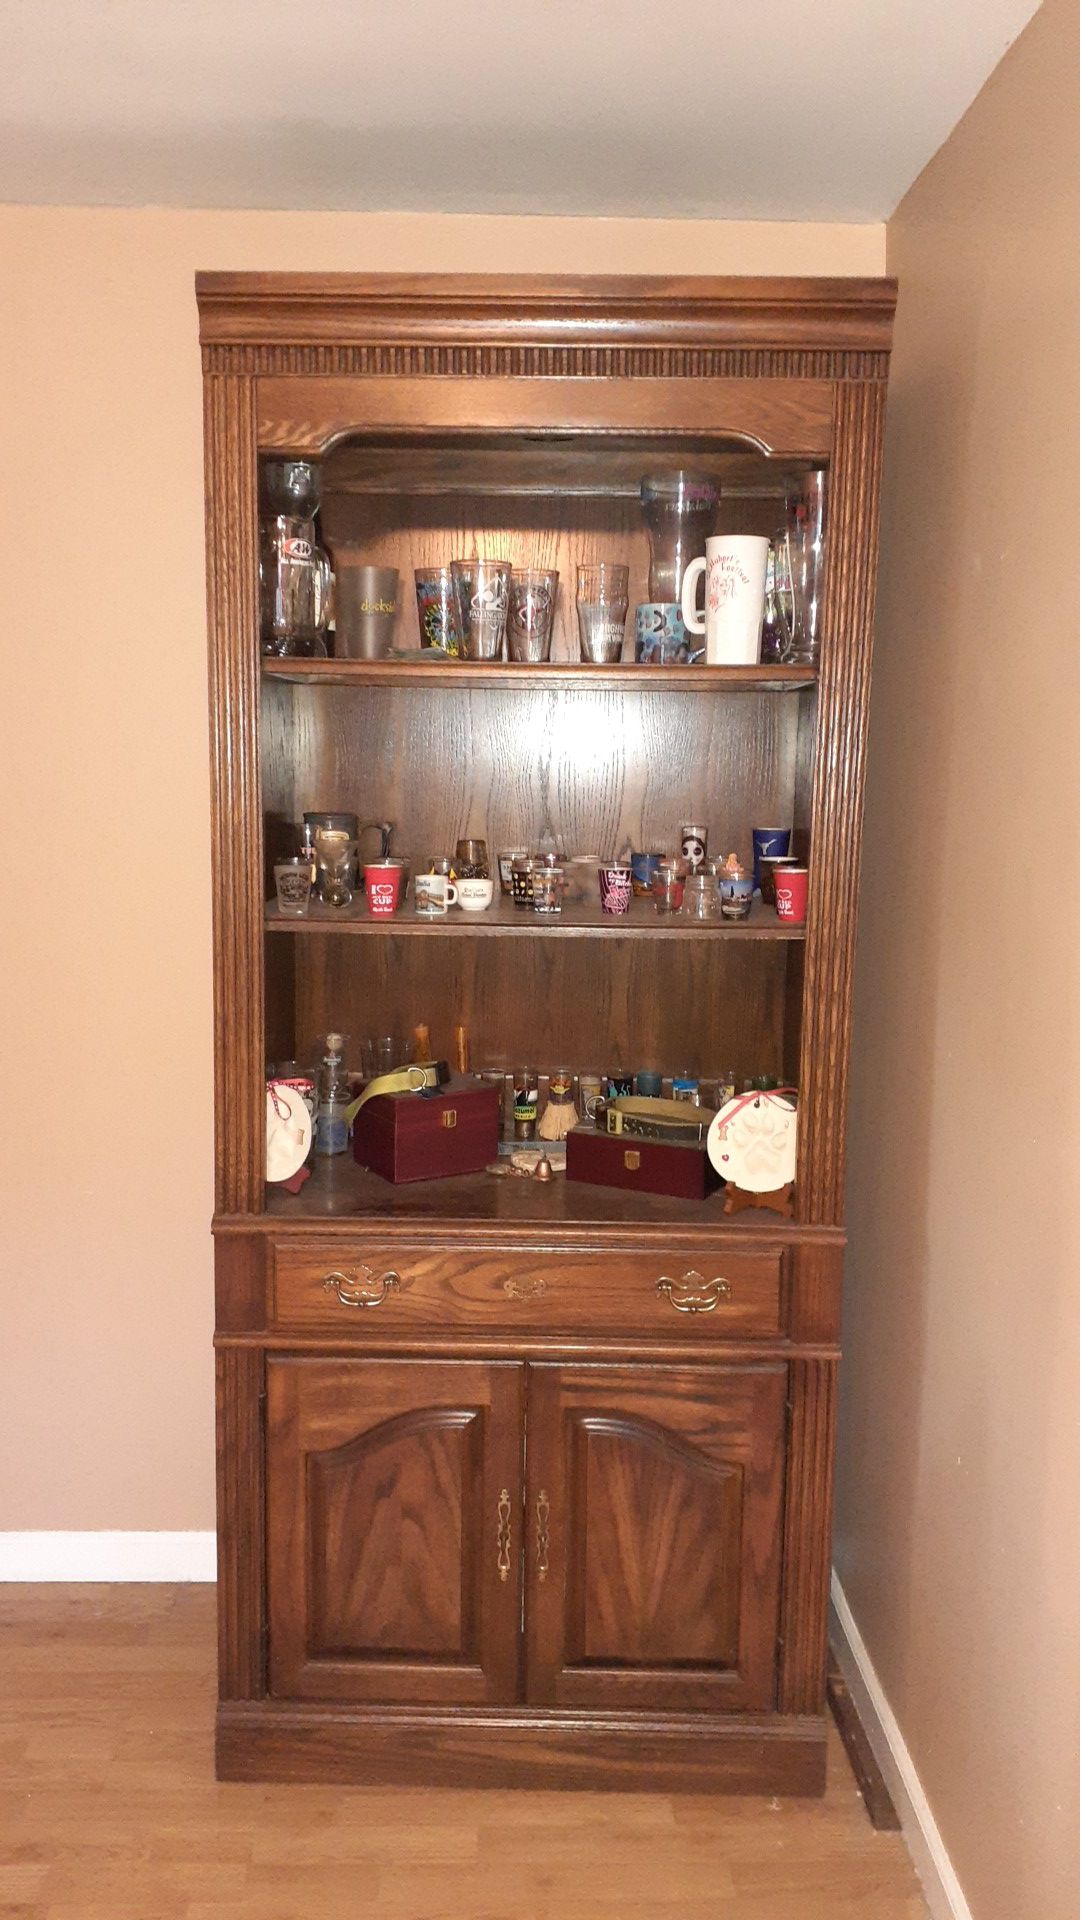 China cabinet or trade for out side patio, treadmill or women's bike